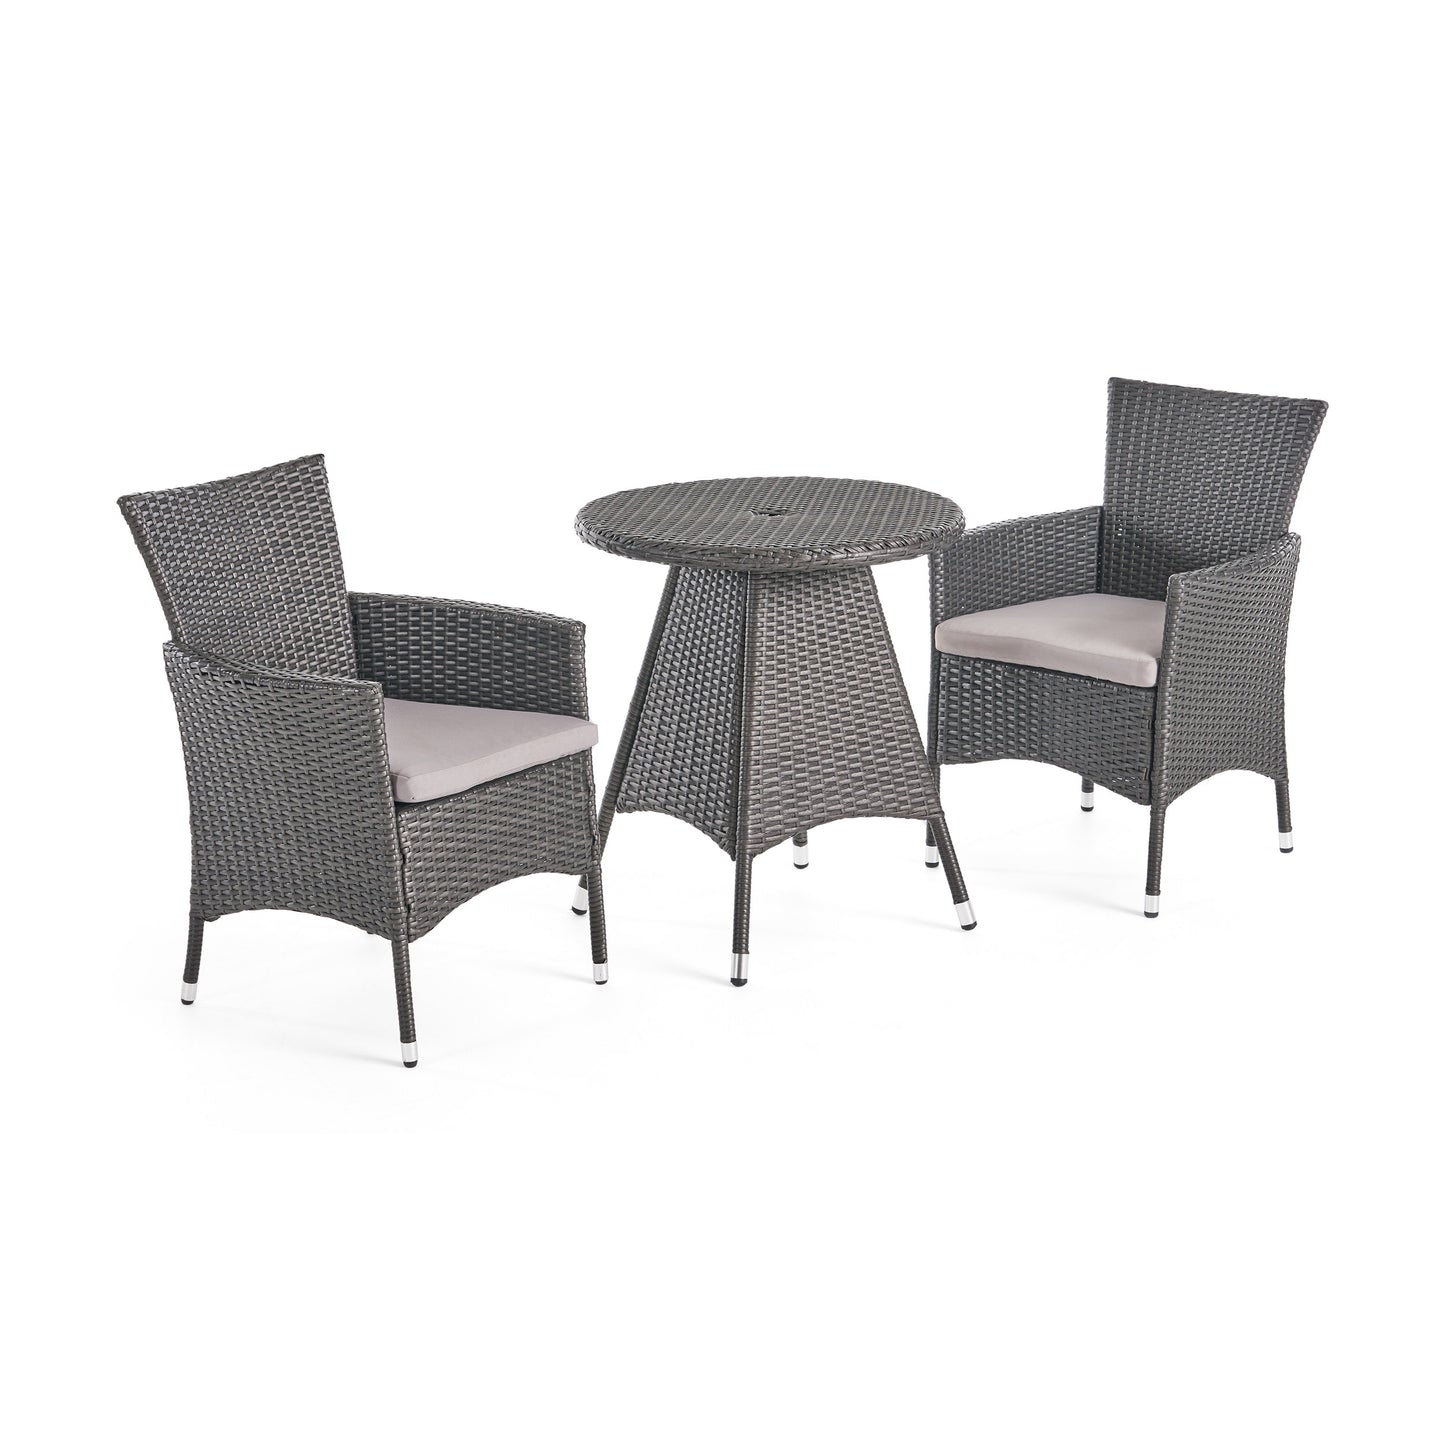 Frank Outdoor 3 Piece Wicker Bistro Set, Grey with Silver Cushions